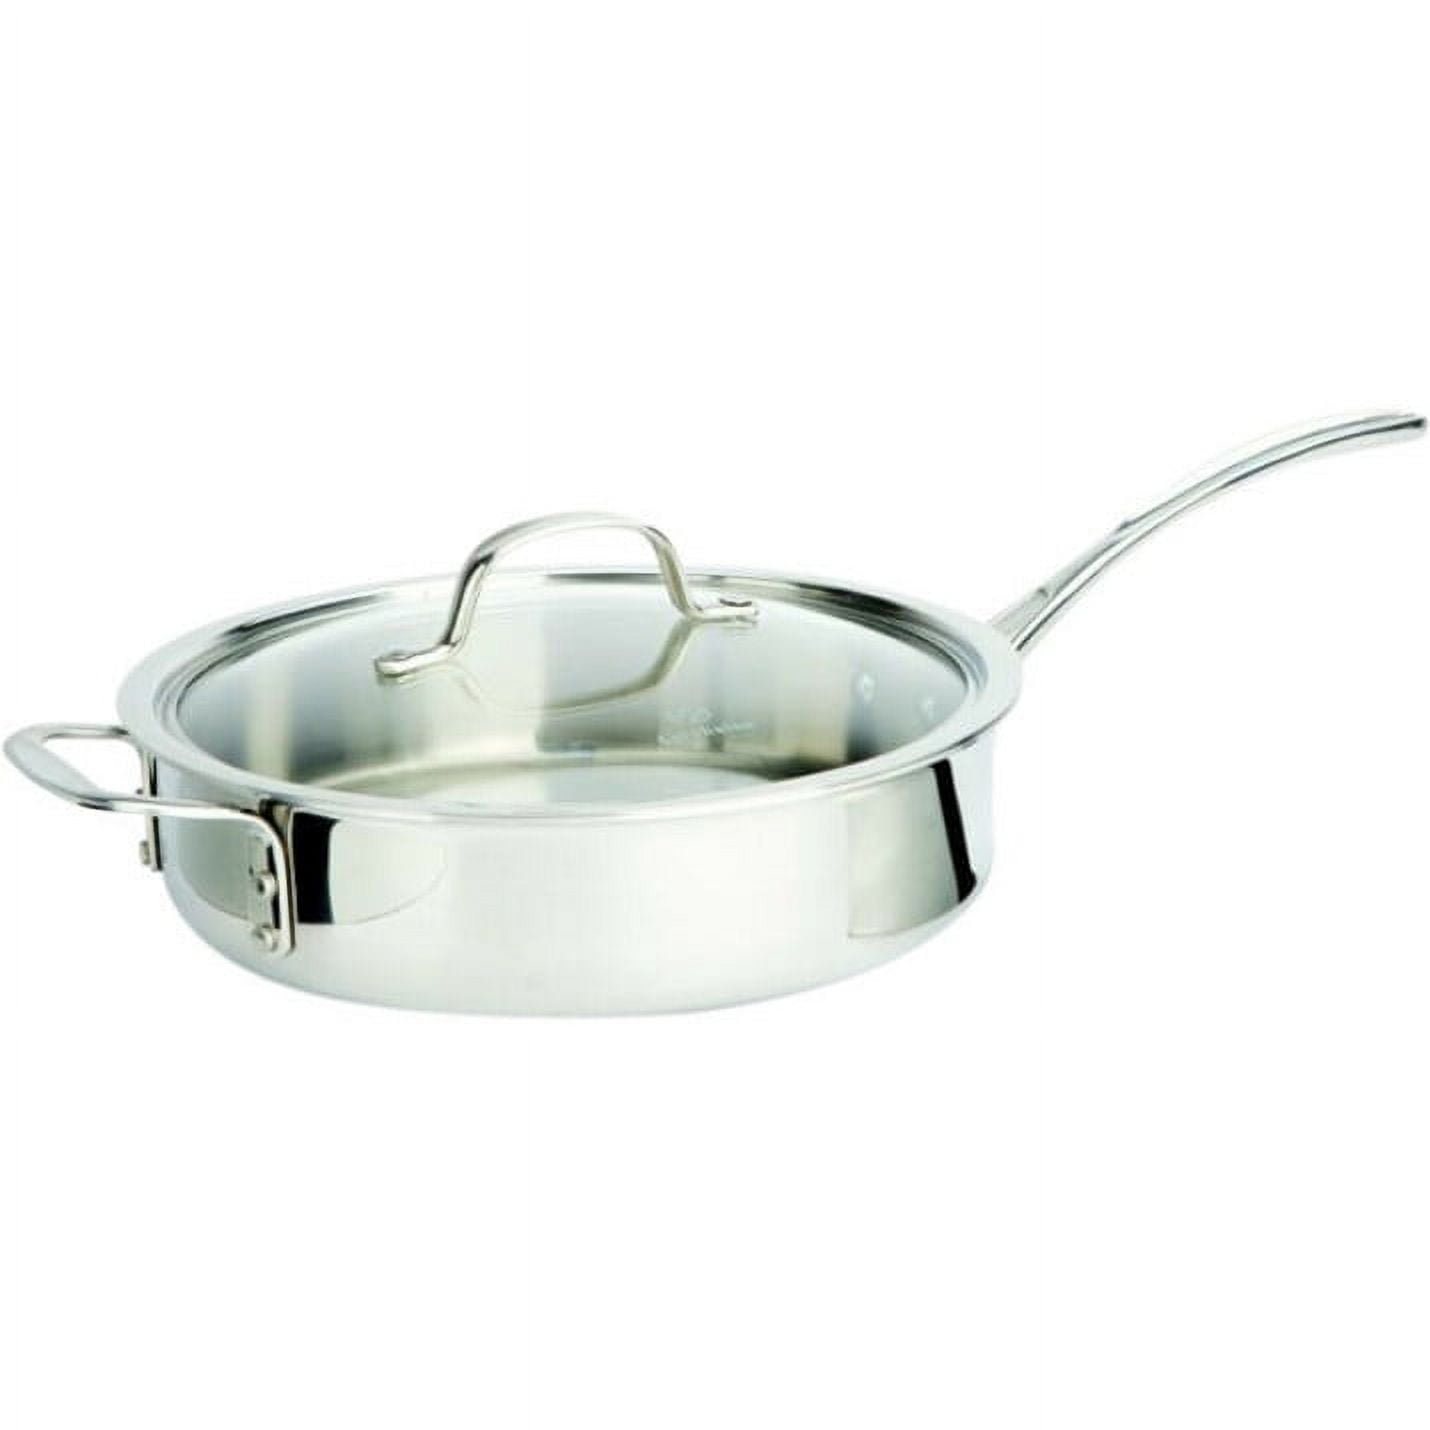 Calphalon 1874301 Tri-Ply Stainless Steel 10-Piece Cookware Set